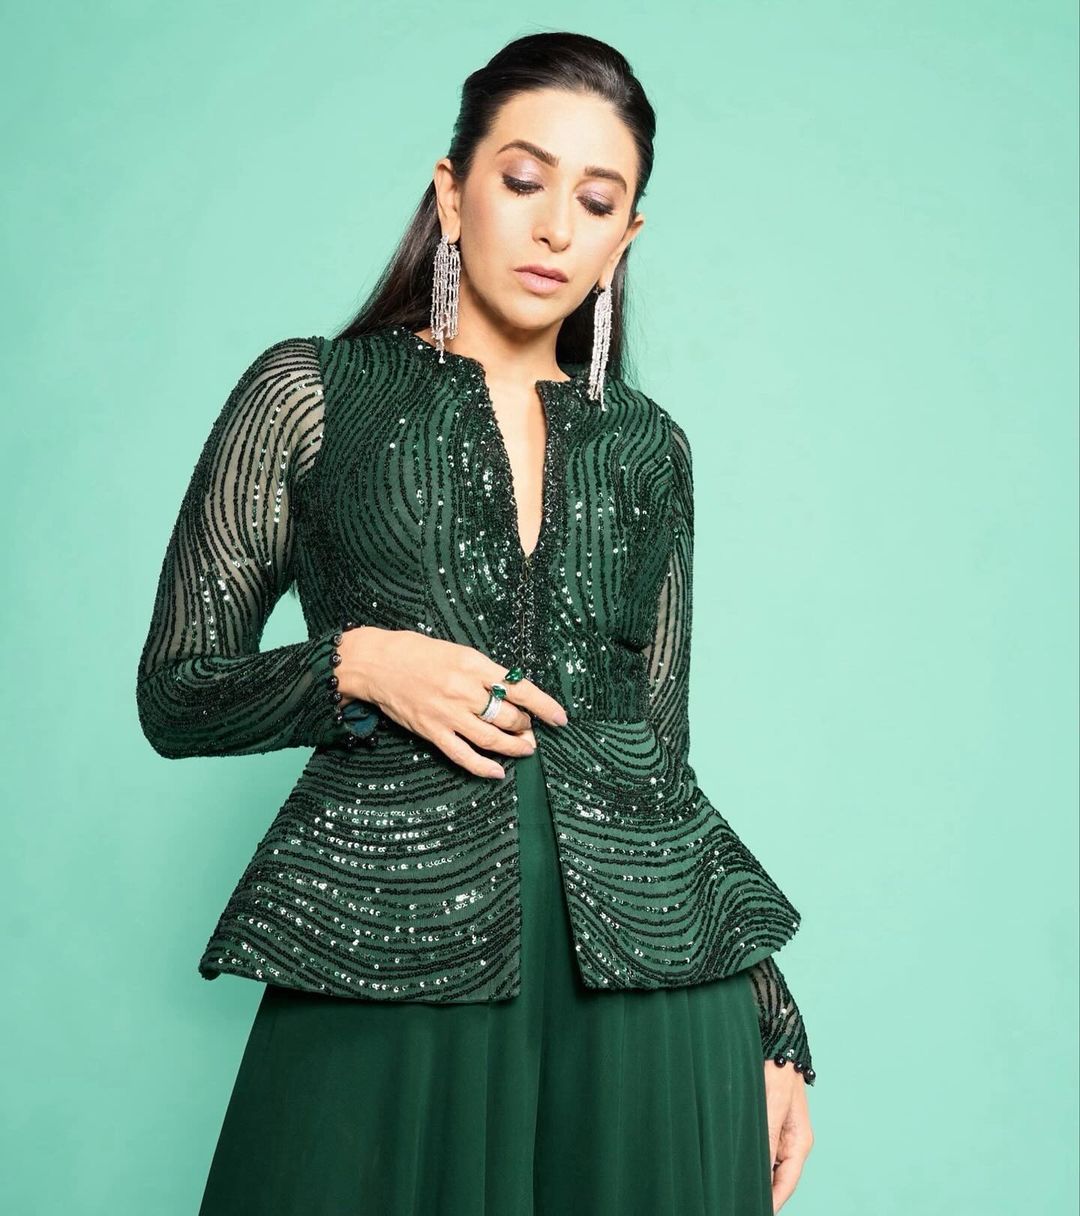 Karisma Kapoor Looks Ready, Steady For Christmas in Green And Black Dress